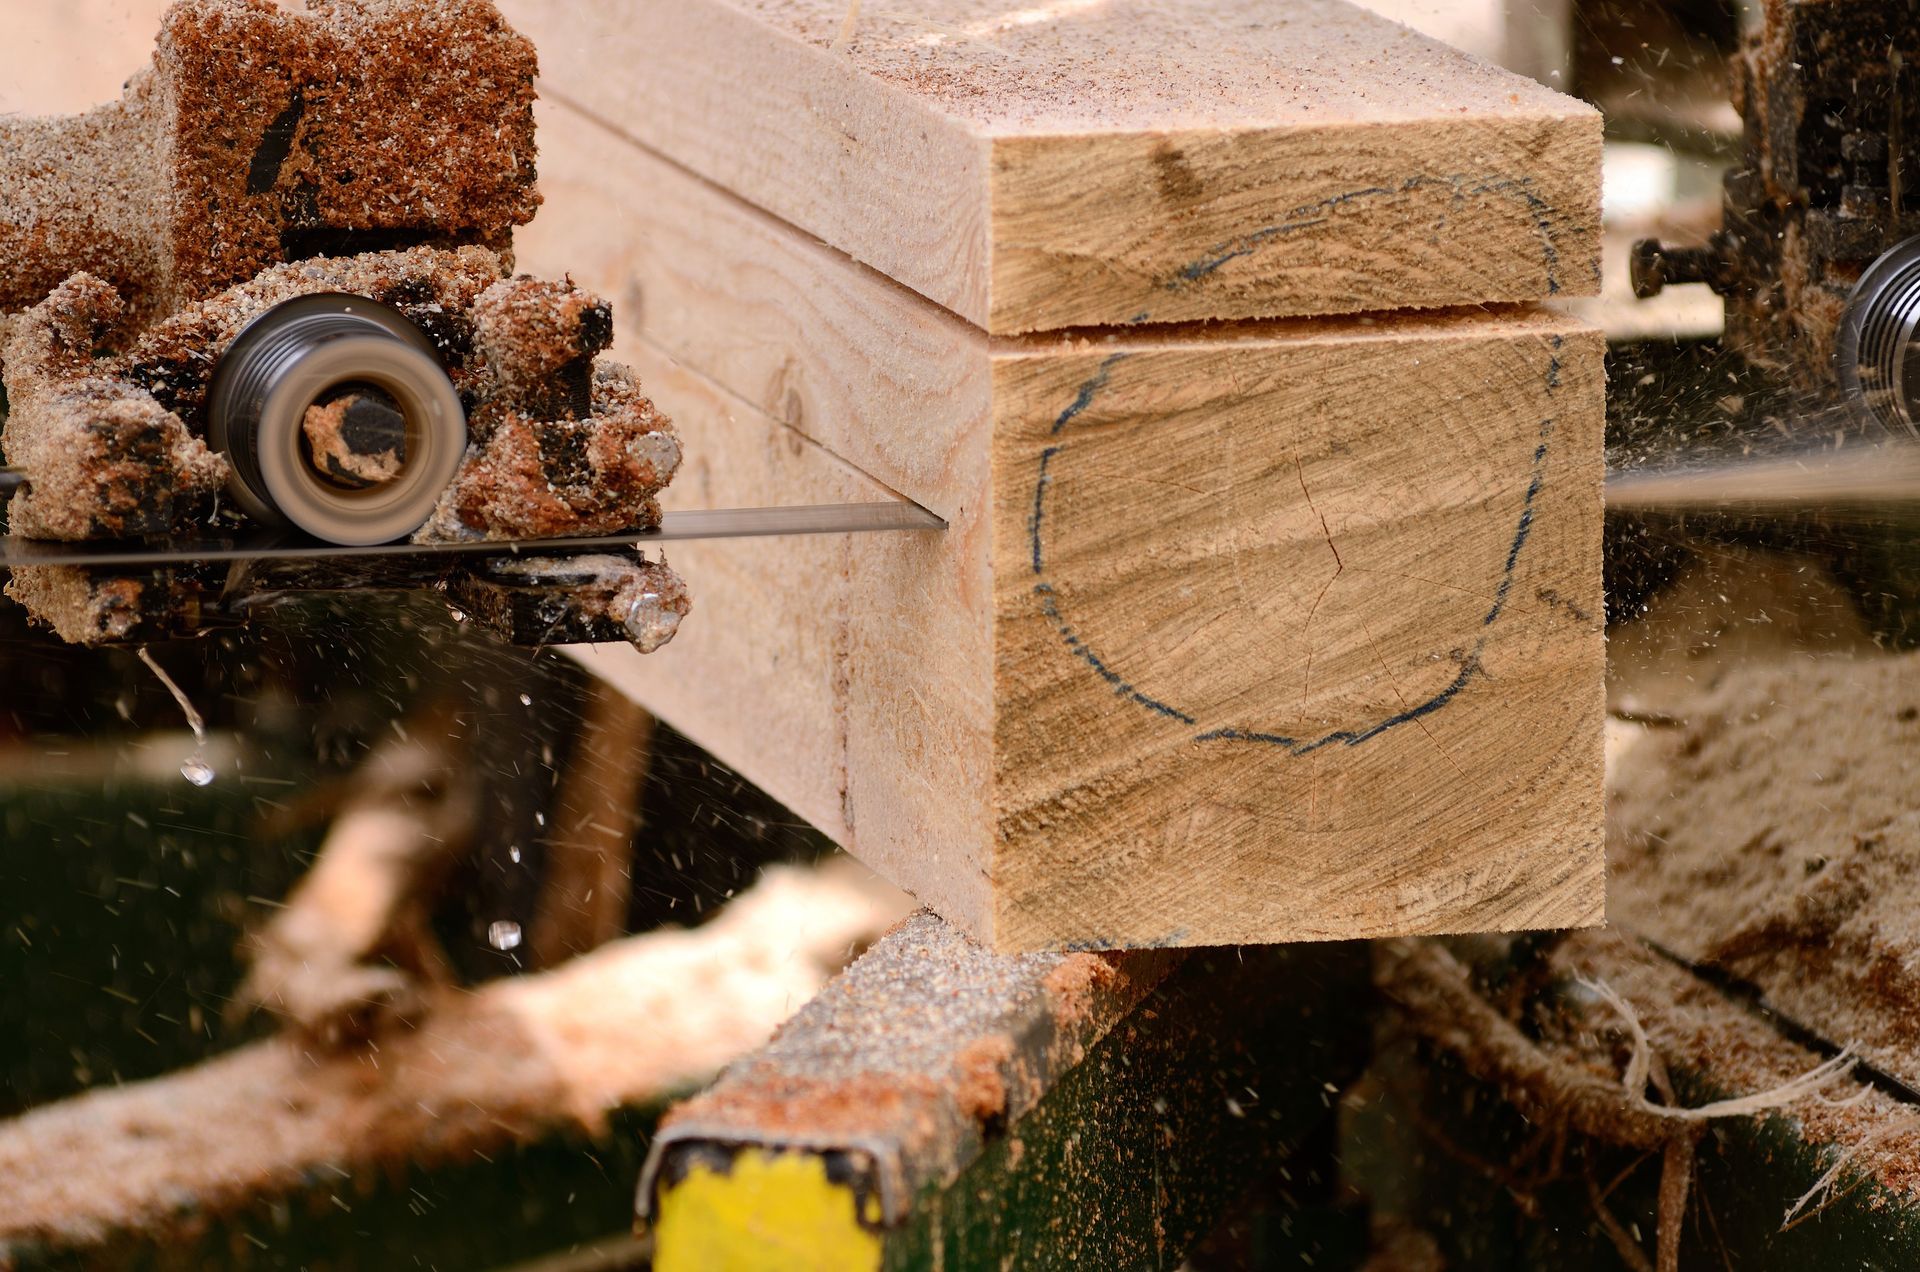 A machine is cutting a piece of wood with a smiley face drawn on it.